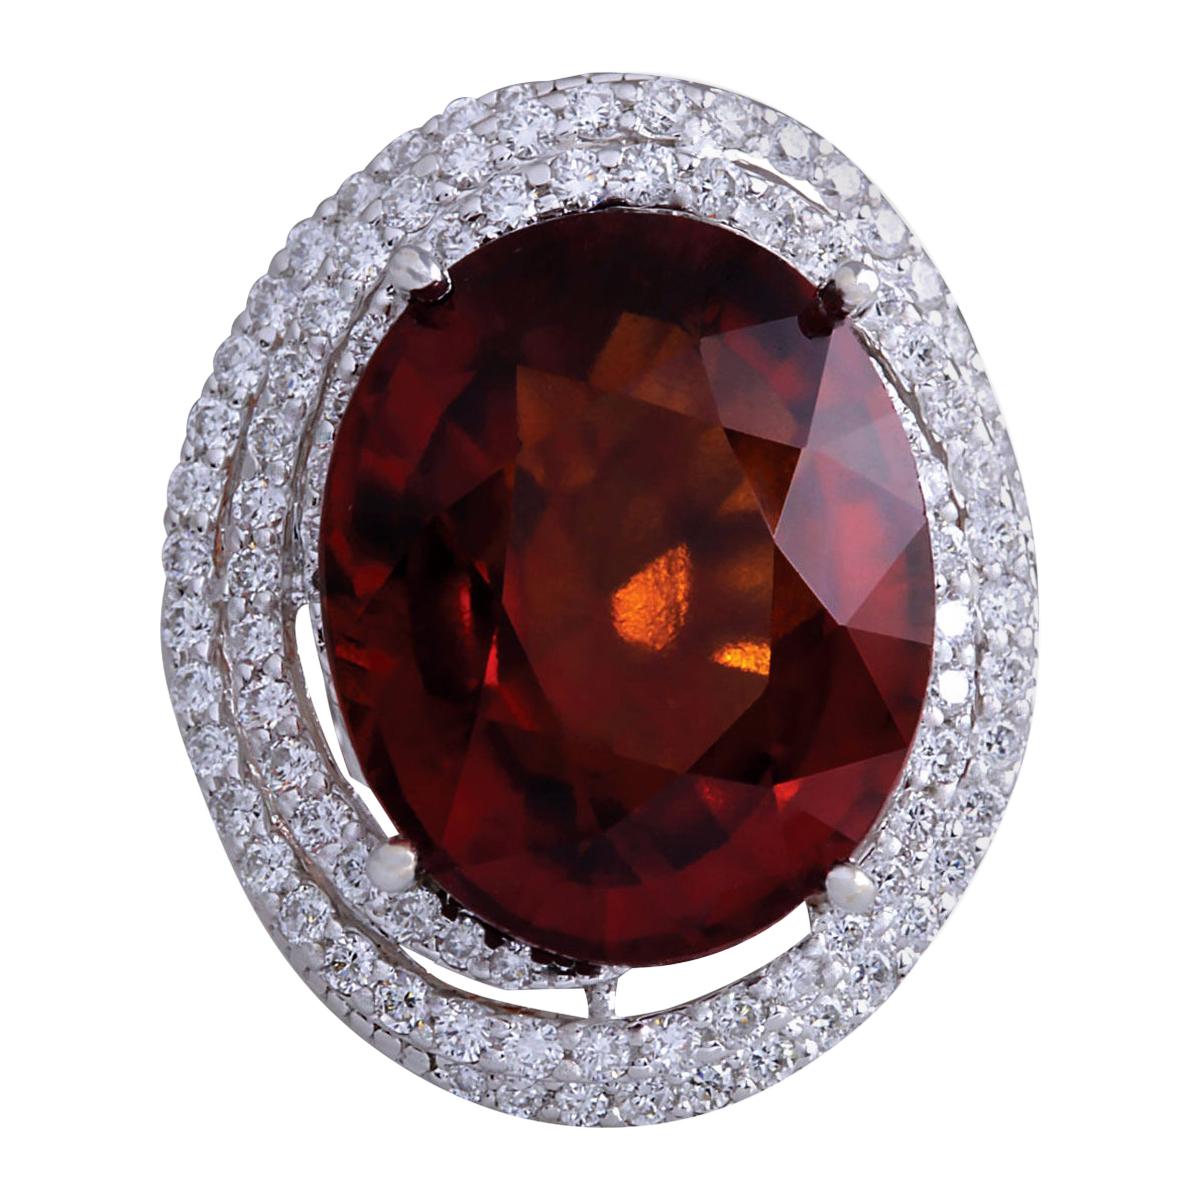 Spectacular Natural Hessonite Garnet and Diamond Ring in 14K White Gold For Sale